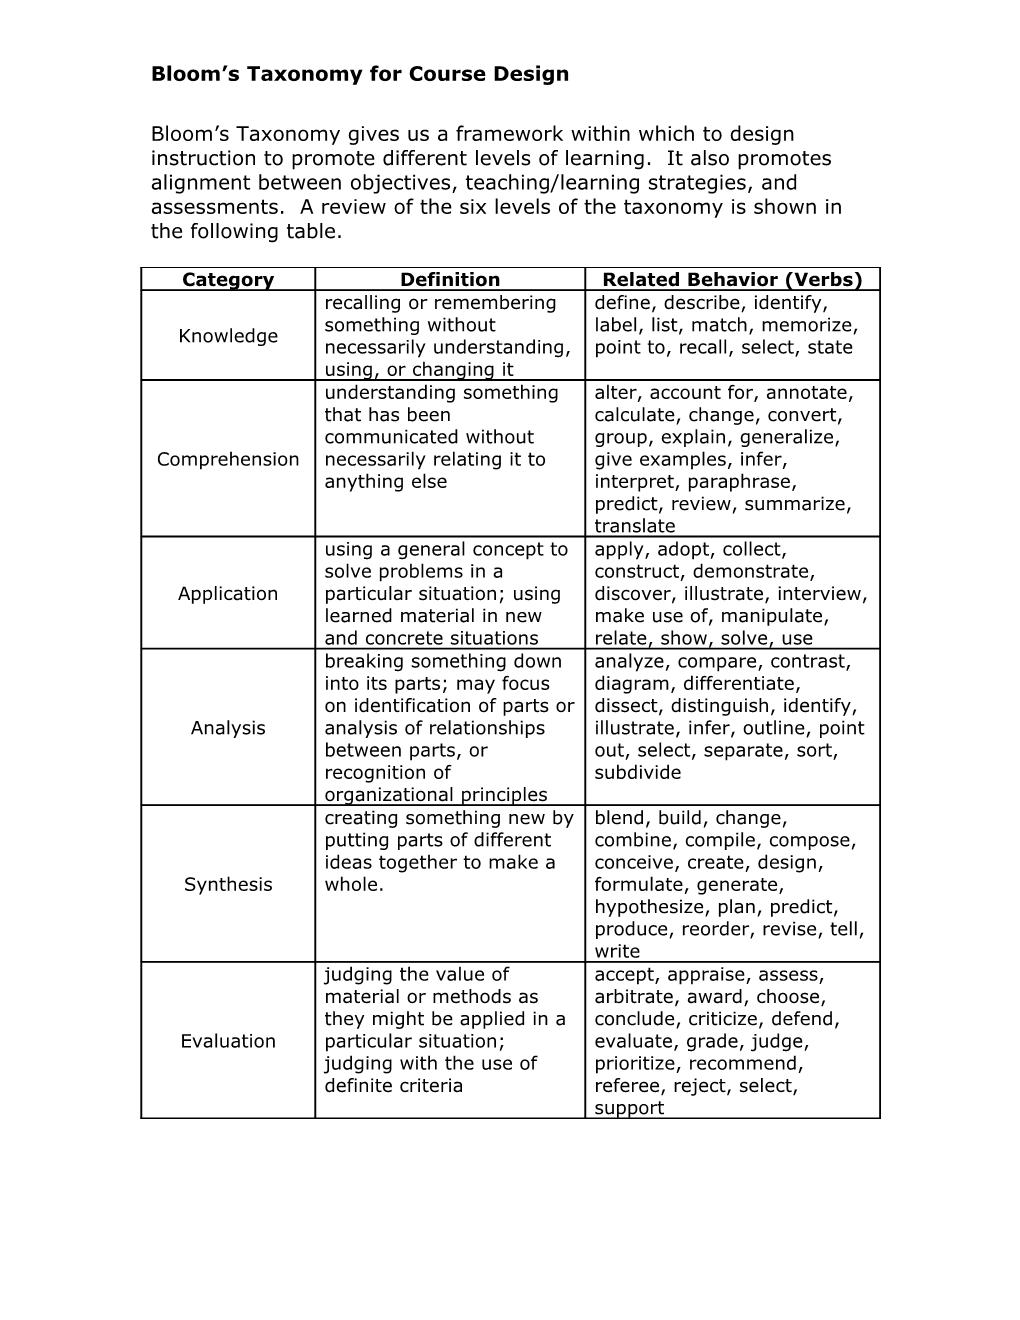 Bloom S Taxonomy Gives Us a Framework Within Which to Design Instruction to Promote Different